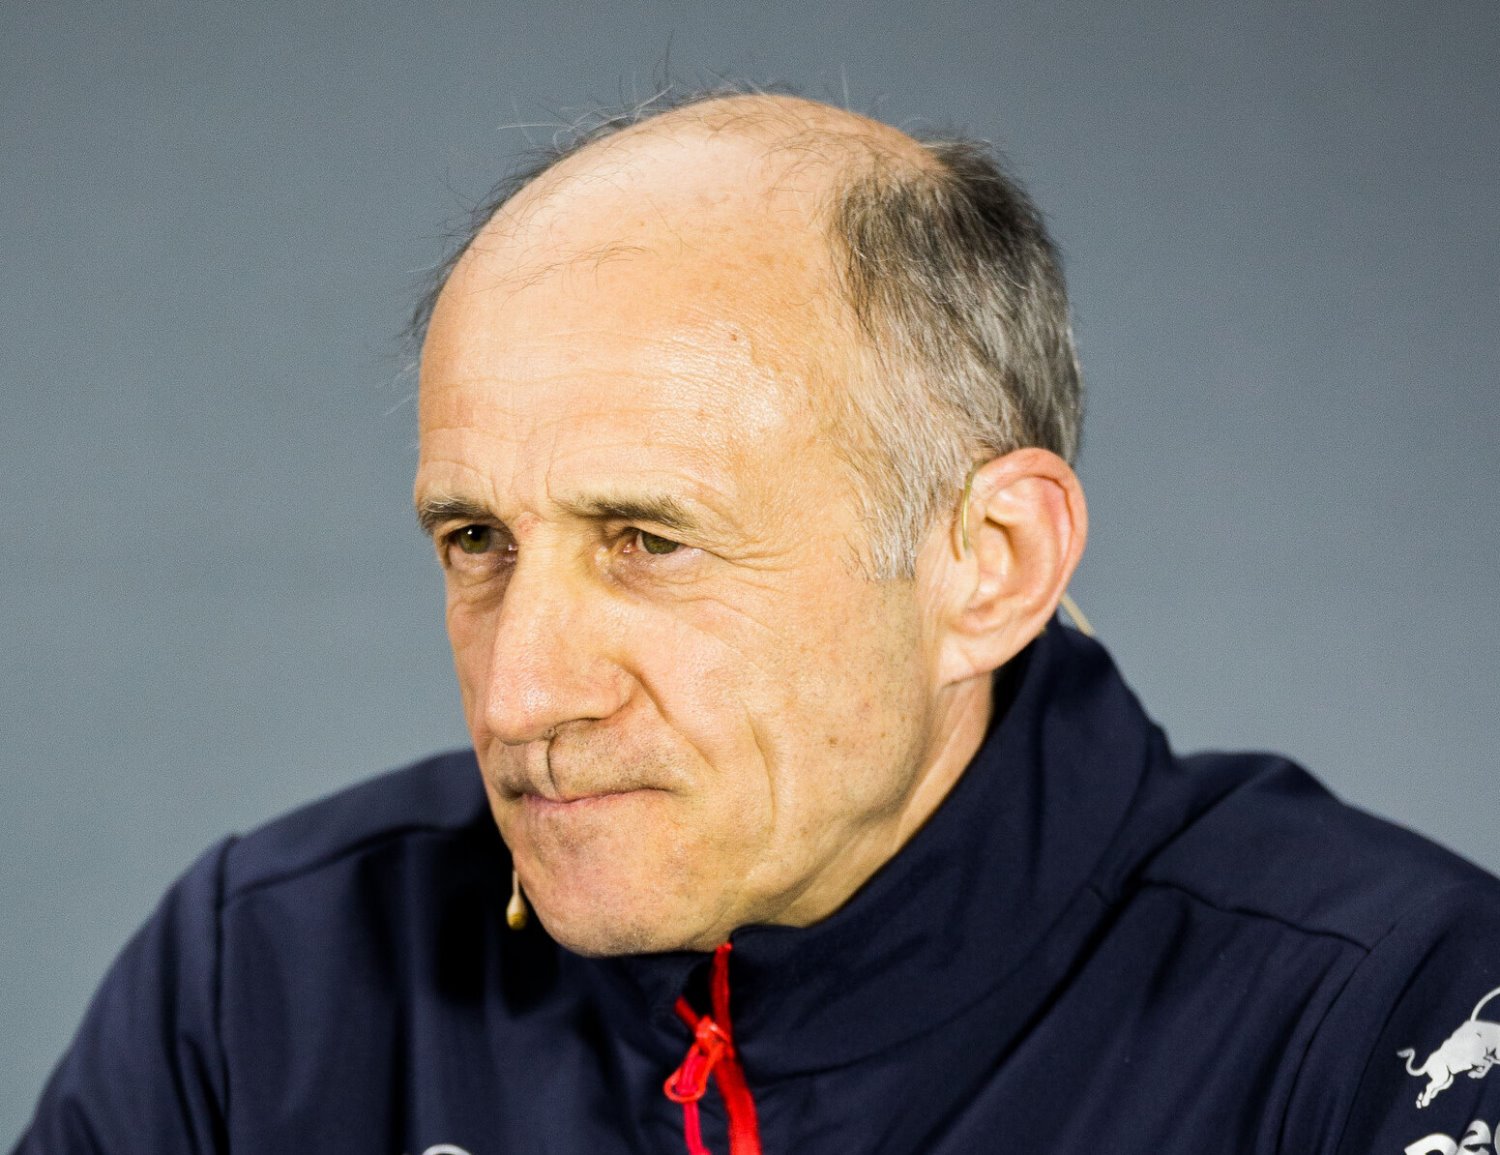 Franz Tost says their factory remains closed